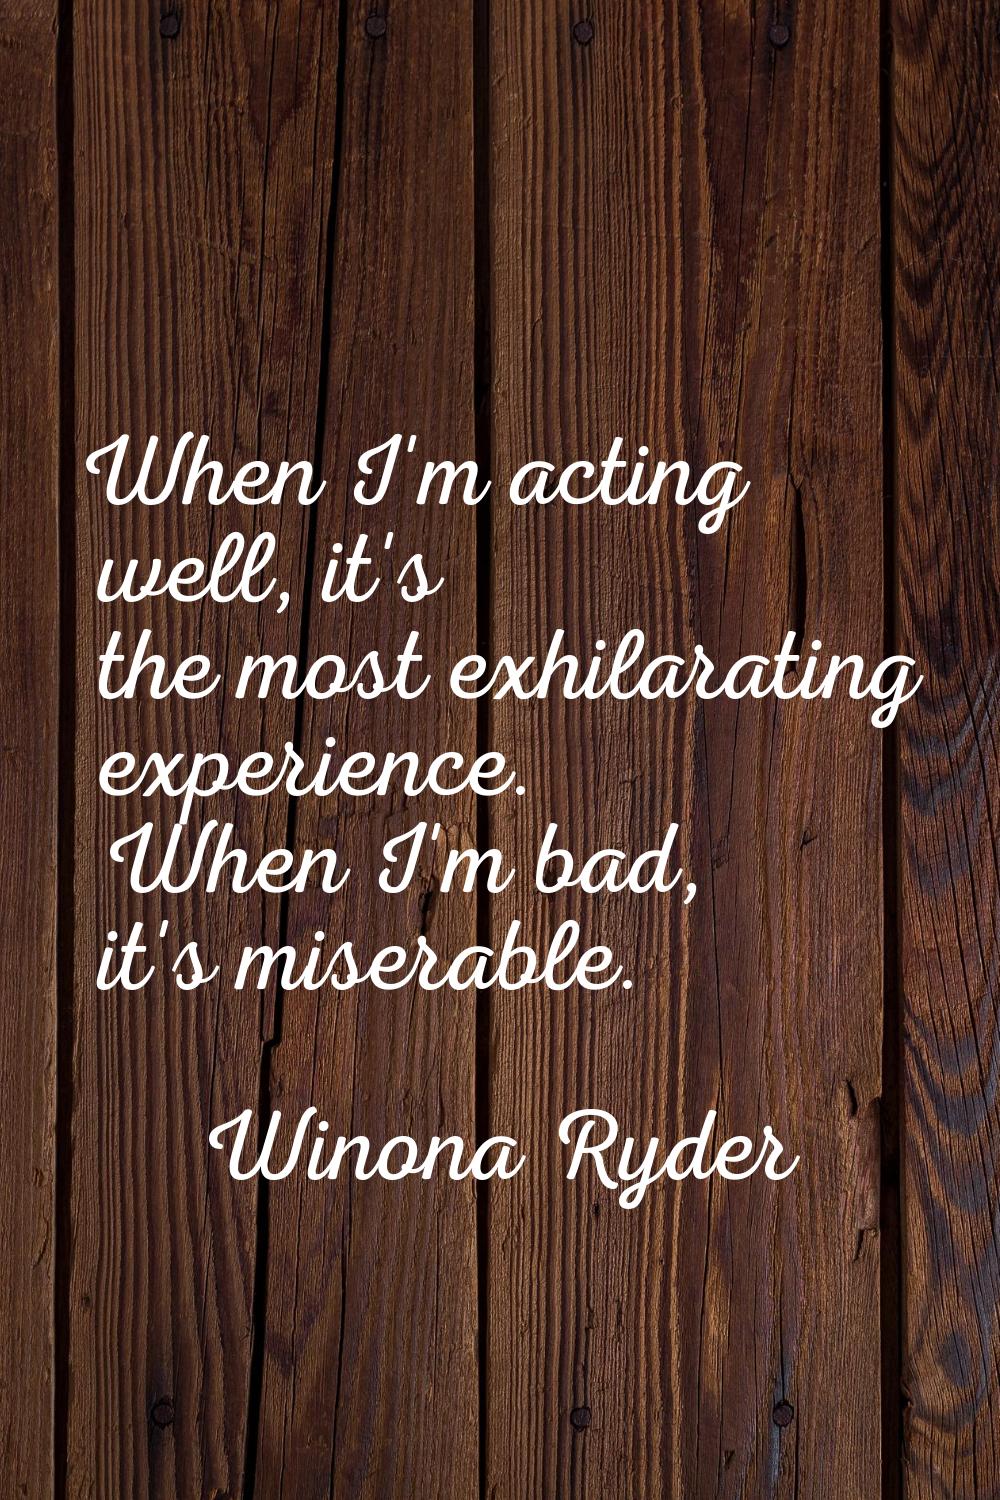 When I'm acting well, it's the most exhilarating experience. When I'm bad, it's miserable.